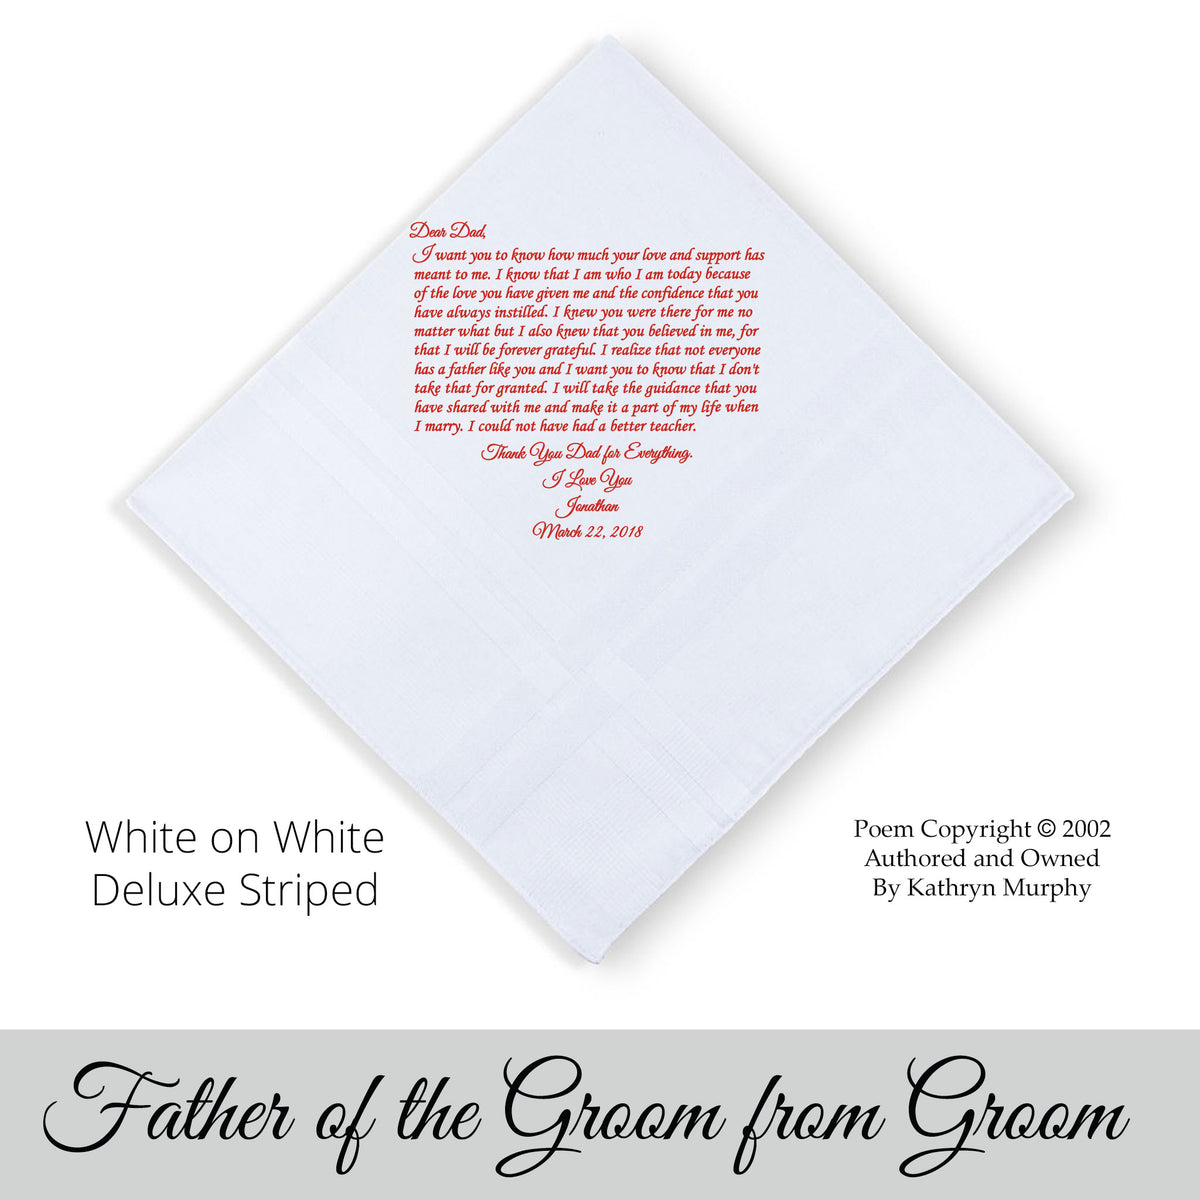 Father of the groom Gift personalized poem handkerchief